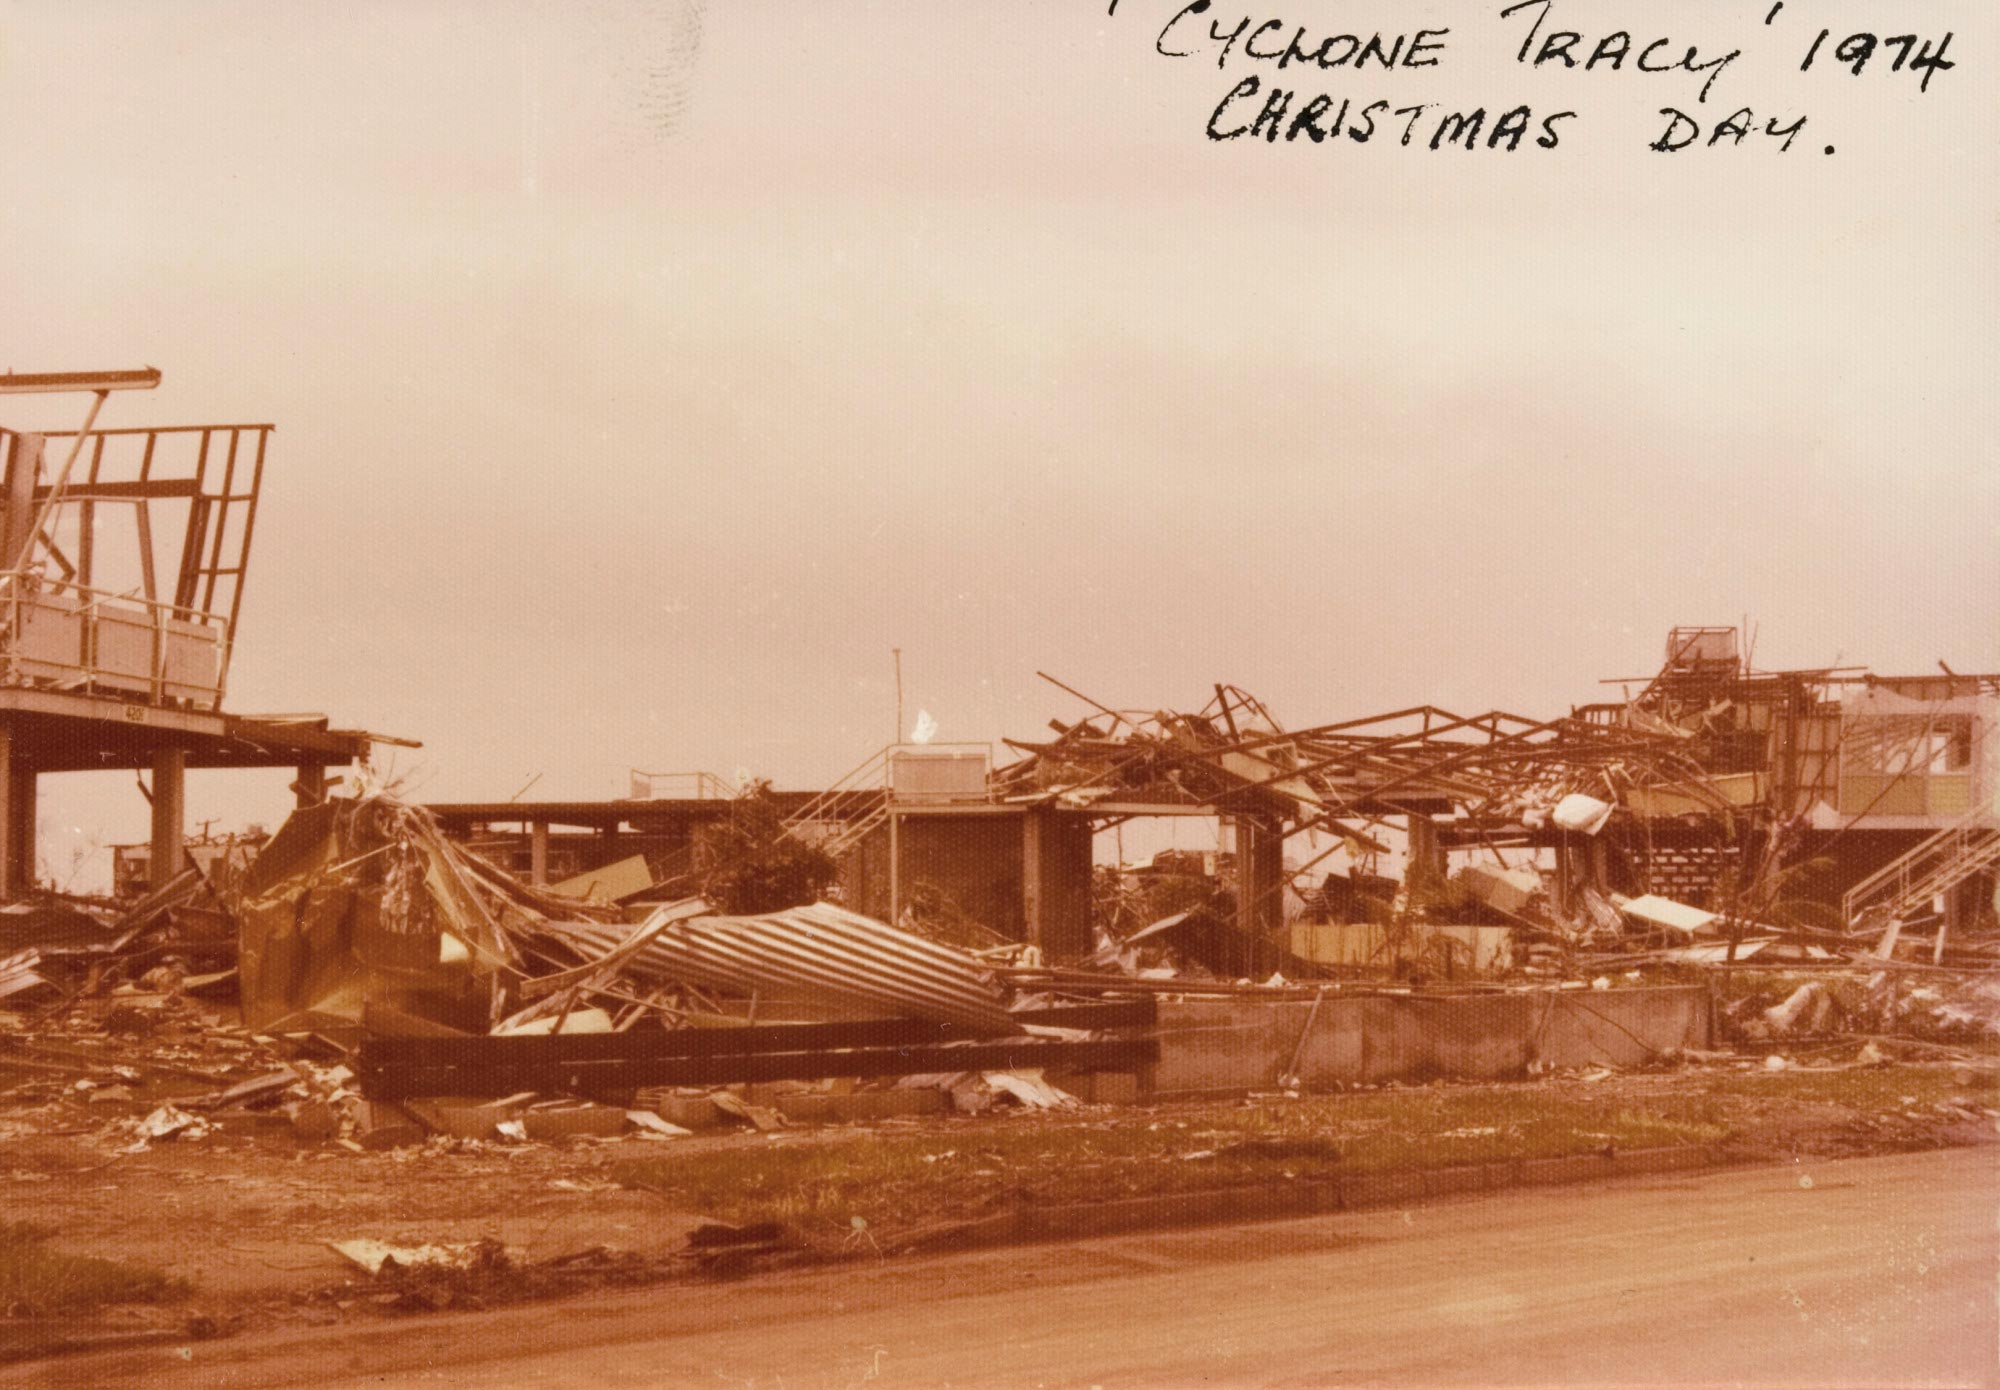 Remains of the Gwynne family home in Wagaman, Darwin, 1974.